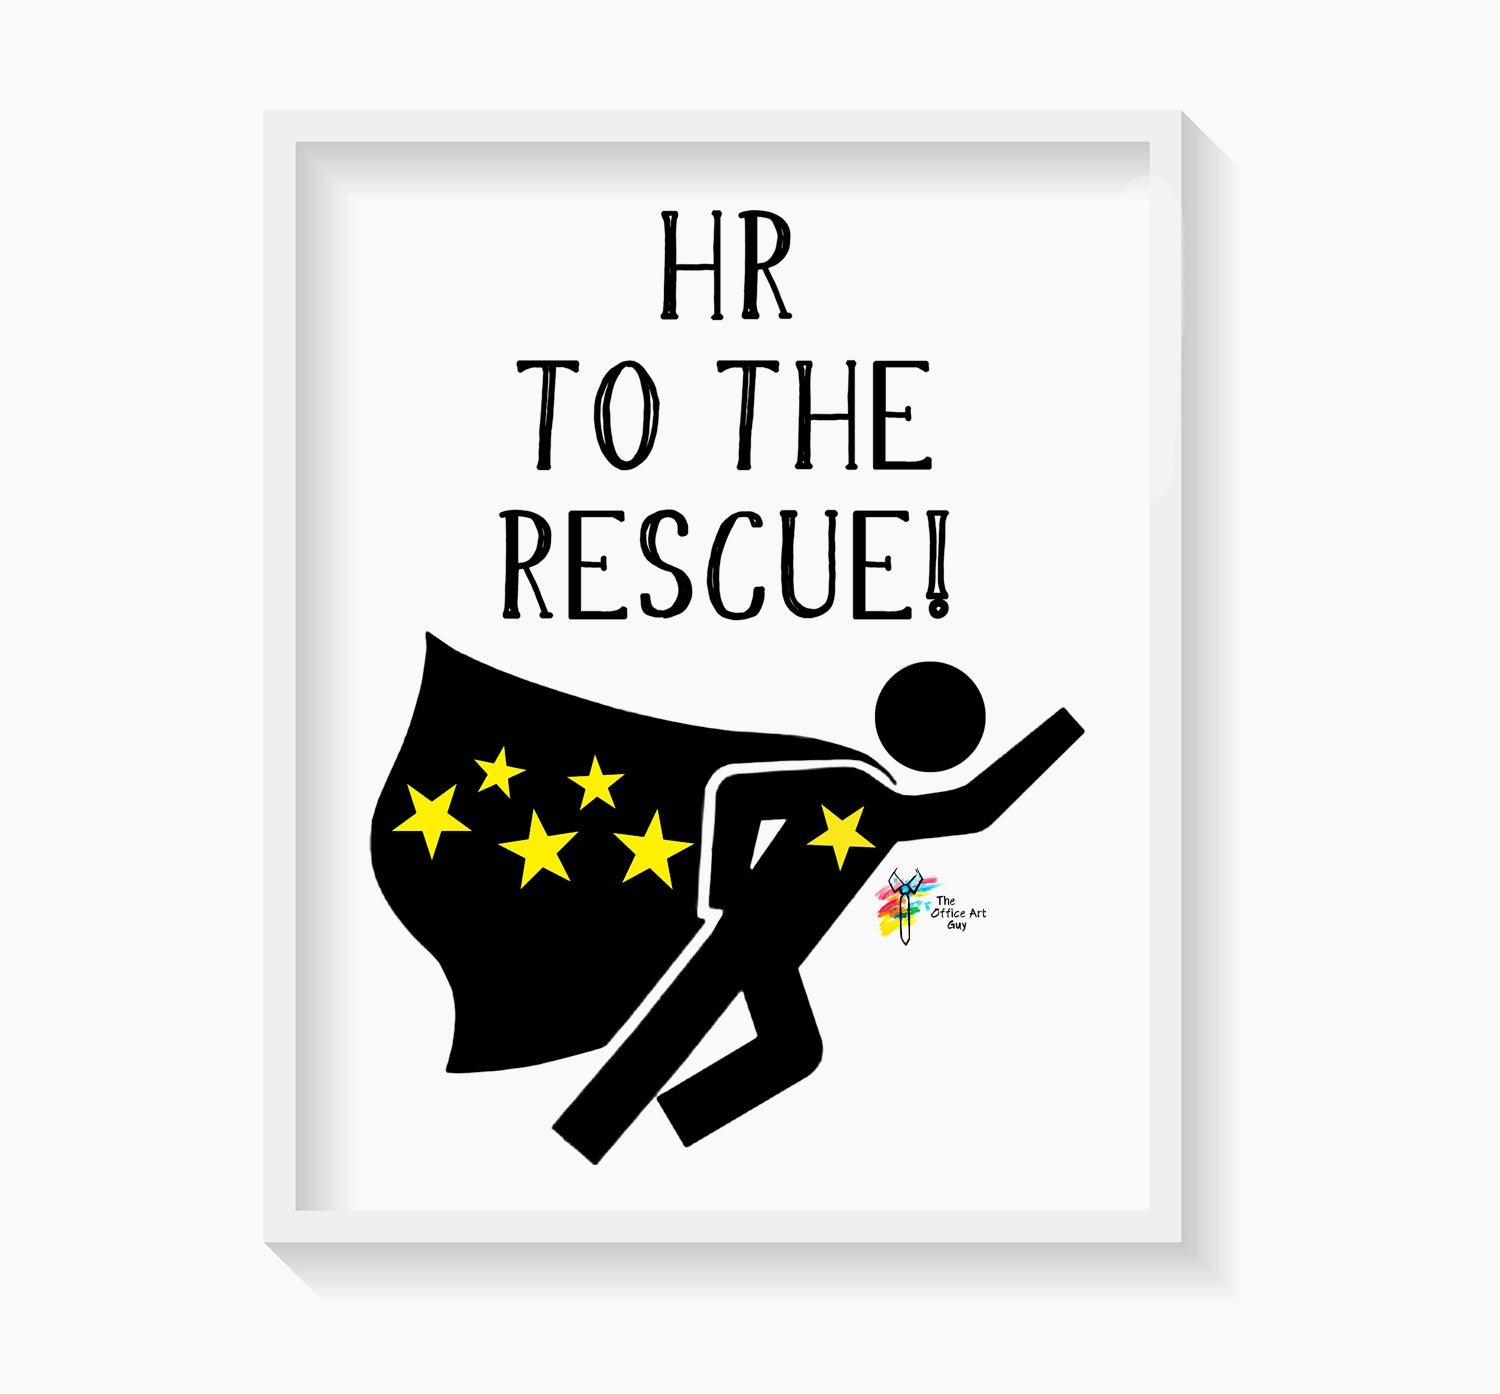 HR Art Print for Human Resources Office Decor by The Office Art Guy